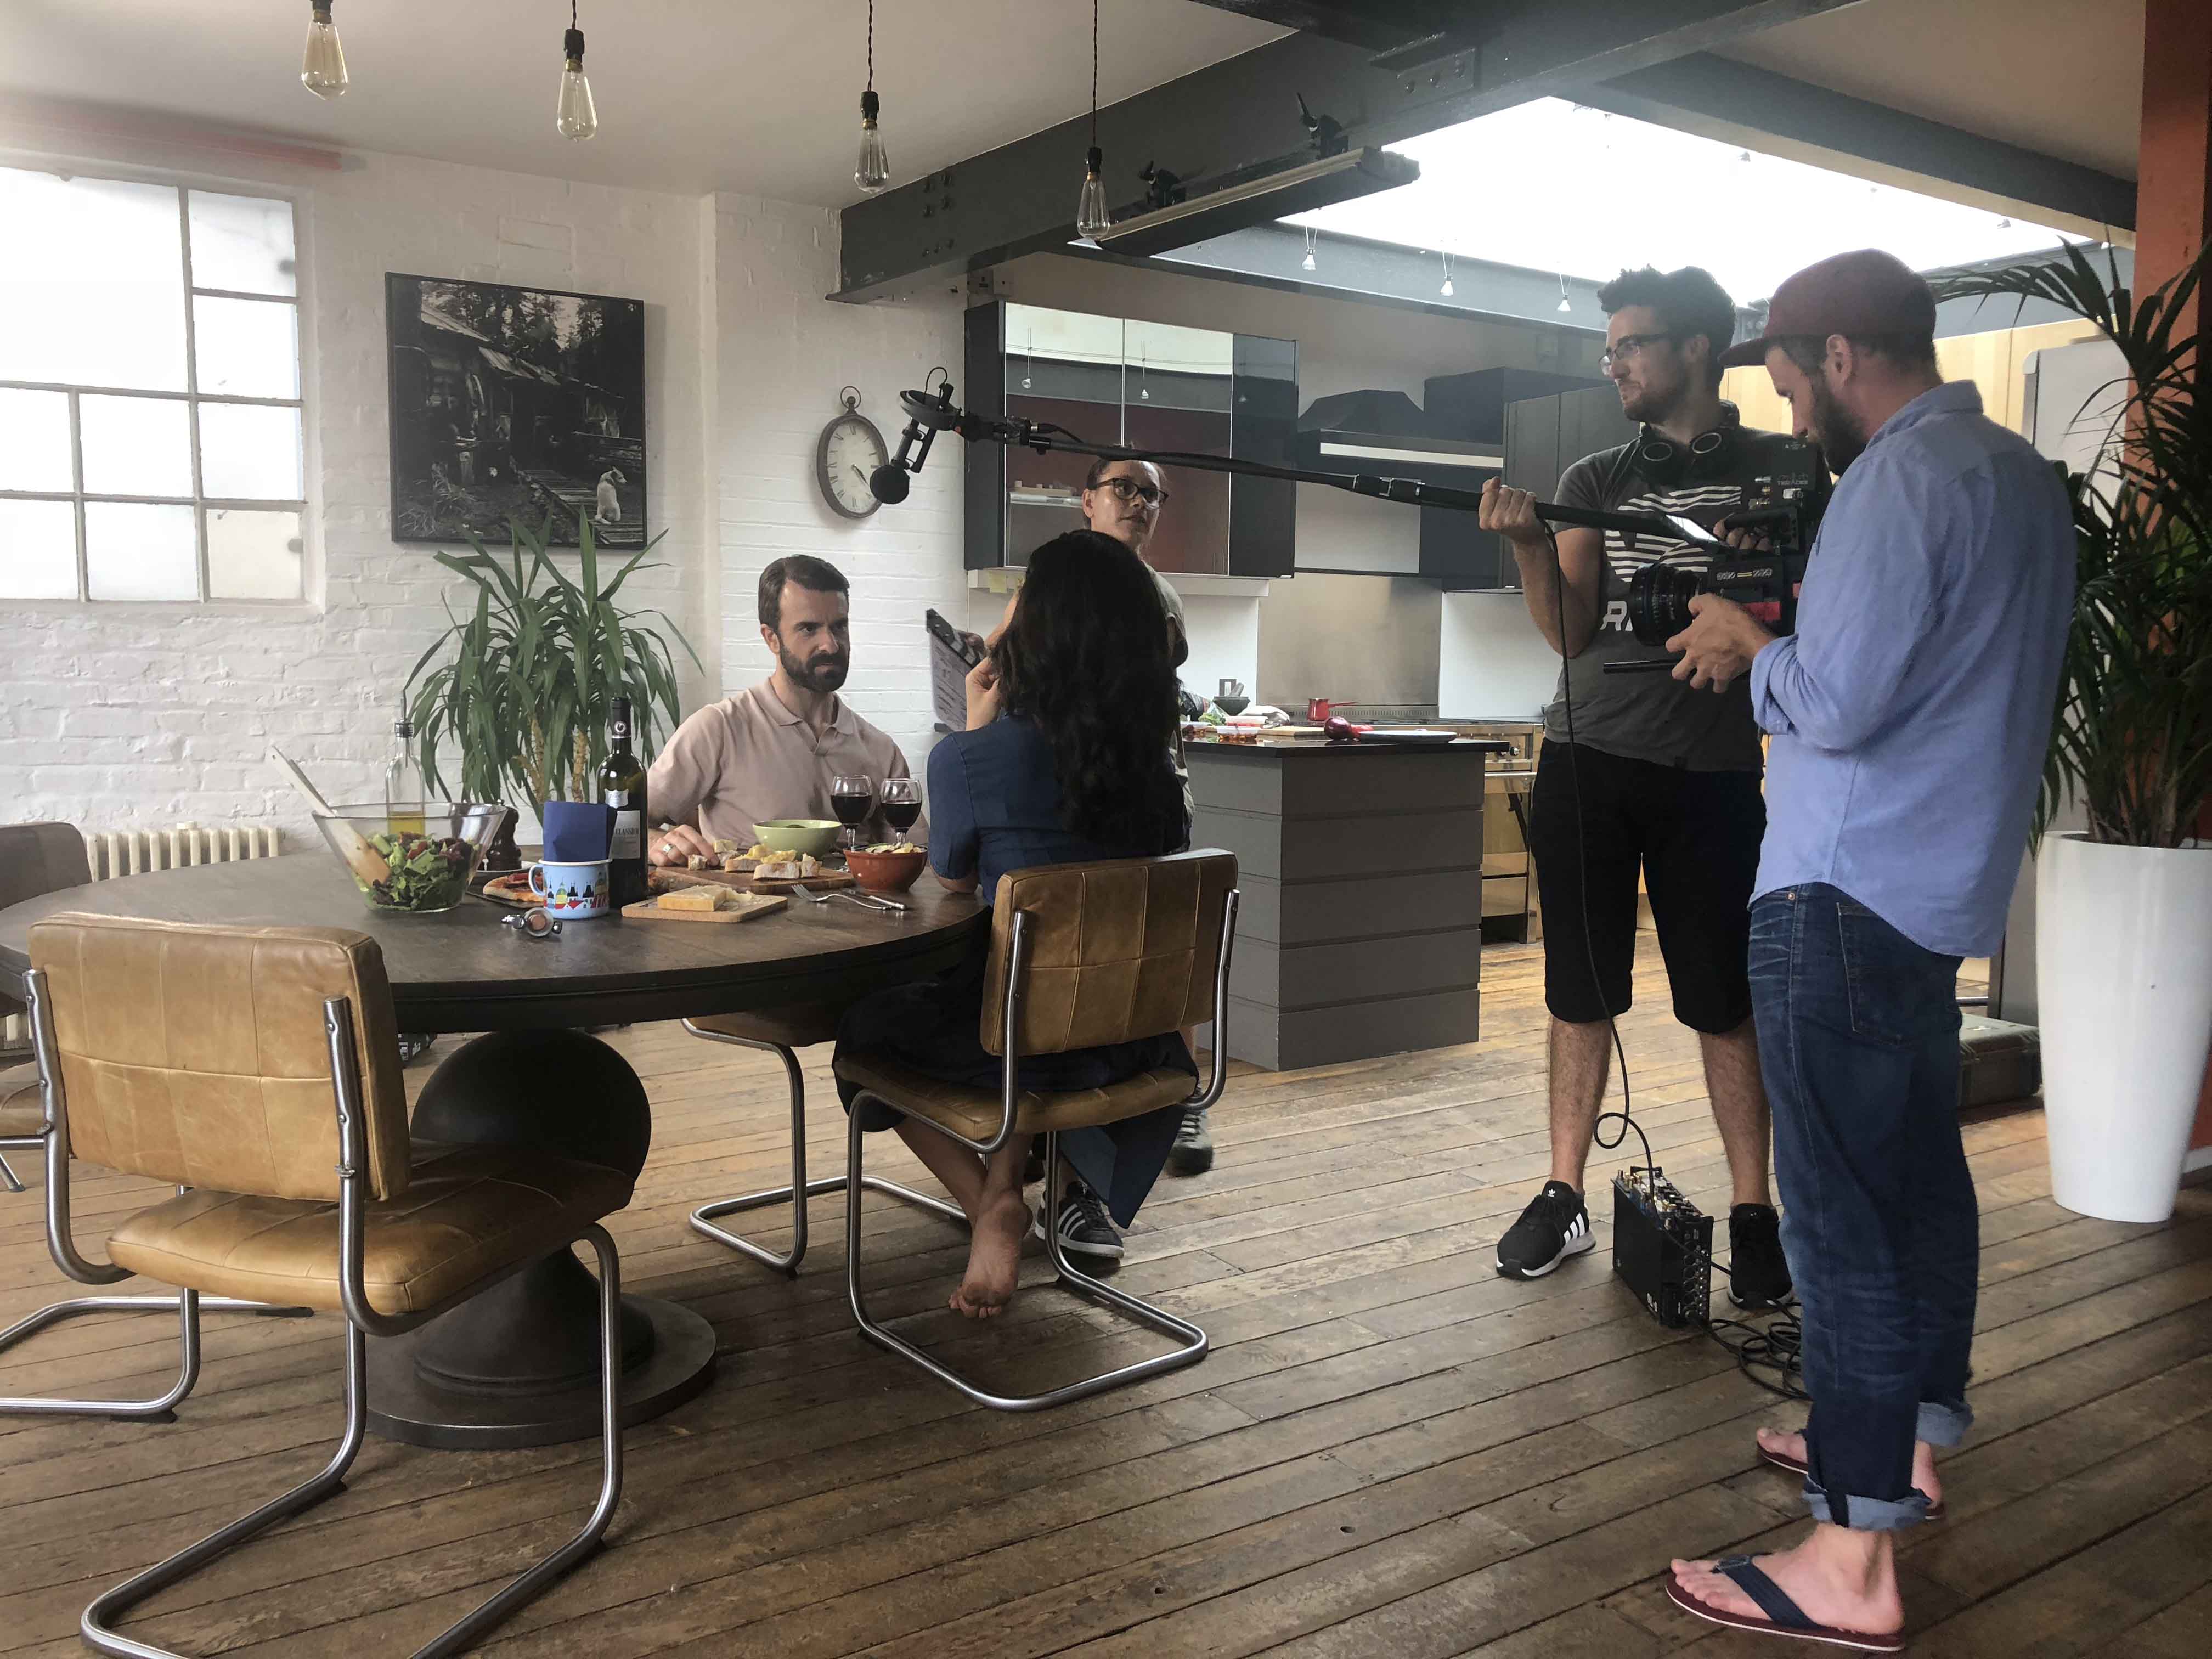 Filming a scene in a kitchen for Deli Discoveries